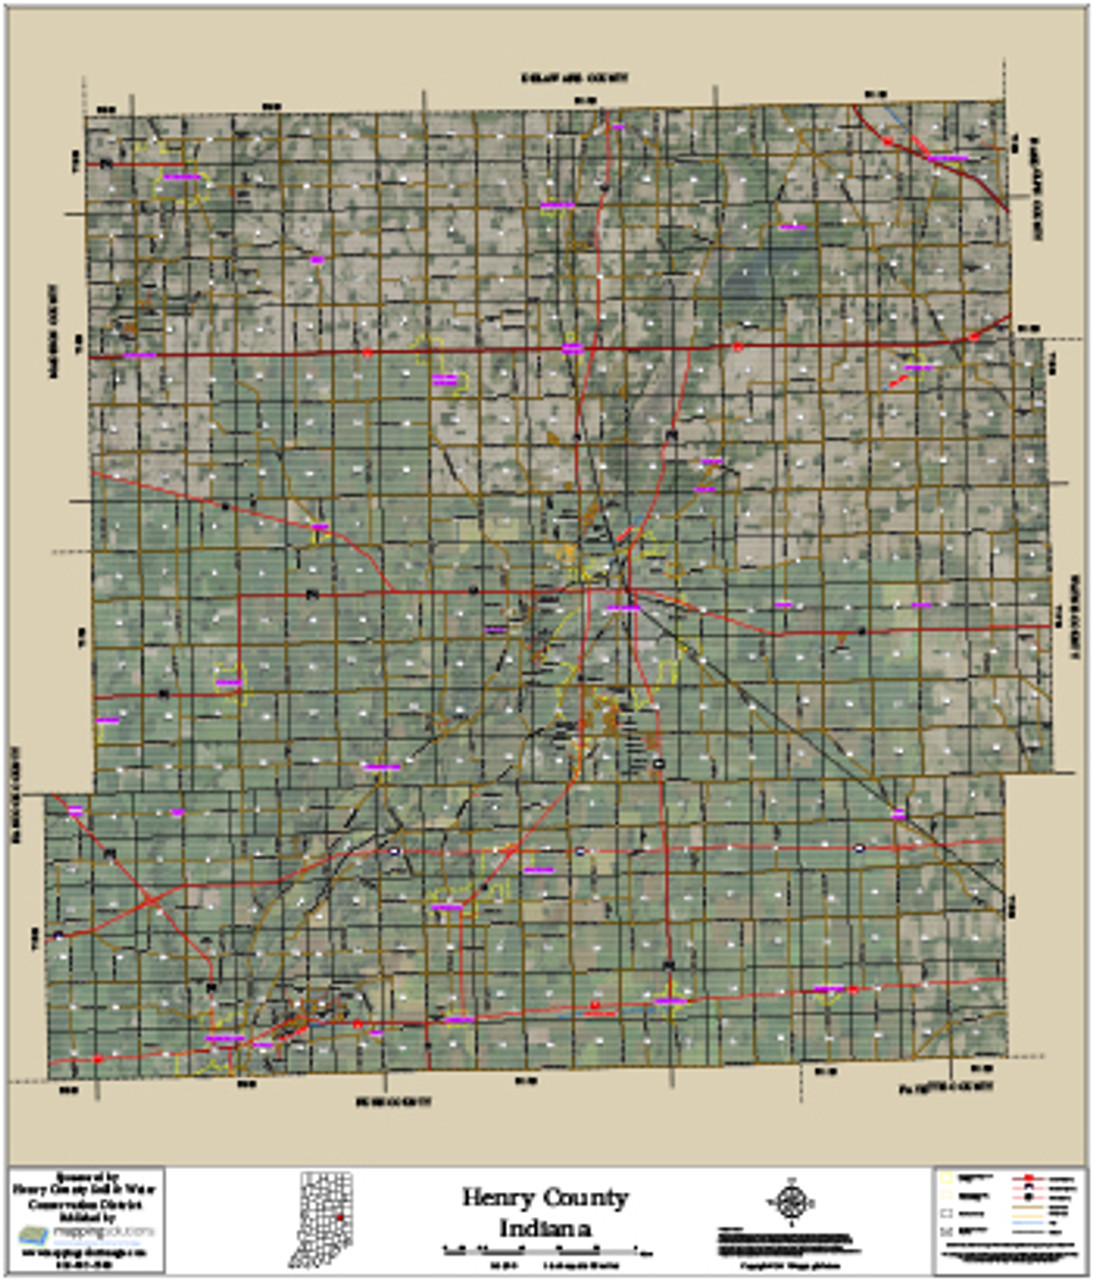 Indiana Gis Property Map Henry County Indiana 2016 Aerial Wall Map, Henry County Indiana 2017 Plat  Book, Henry County Plat Map, Plat Book, Gis Parcel Data, Property Lines Map,  Aerial Imagery | Parcel Plat Maps For